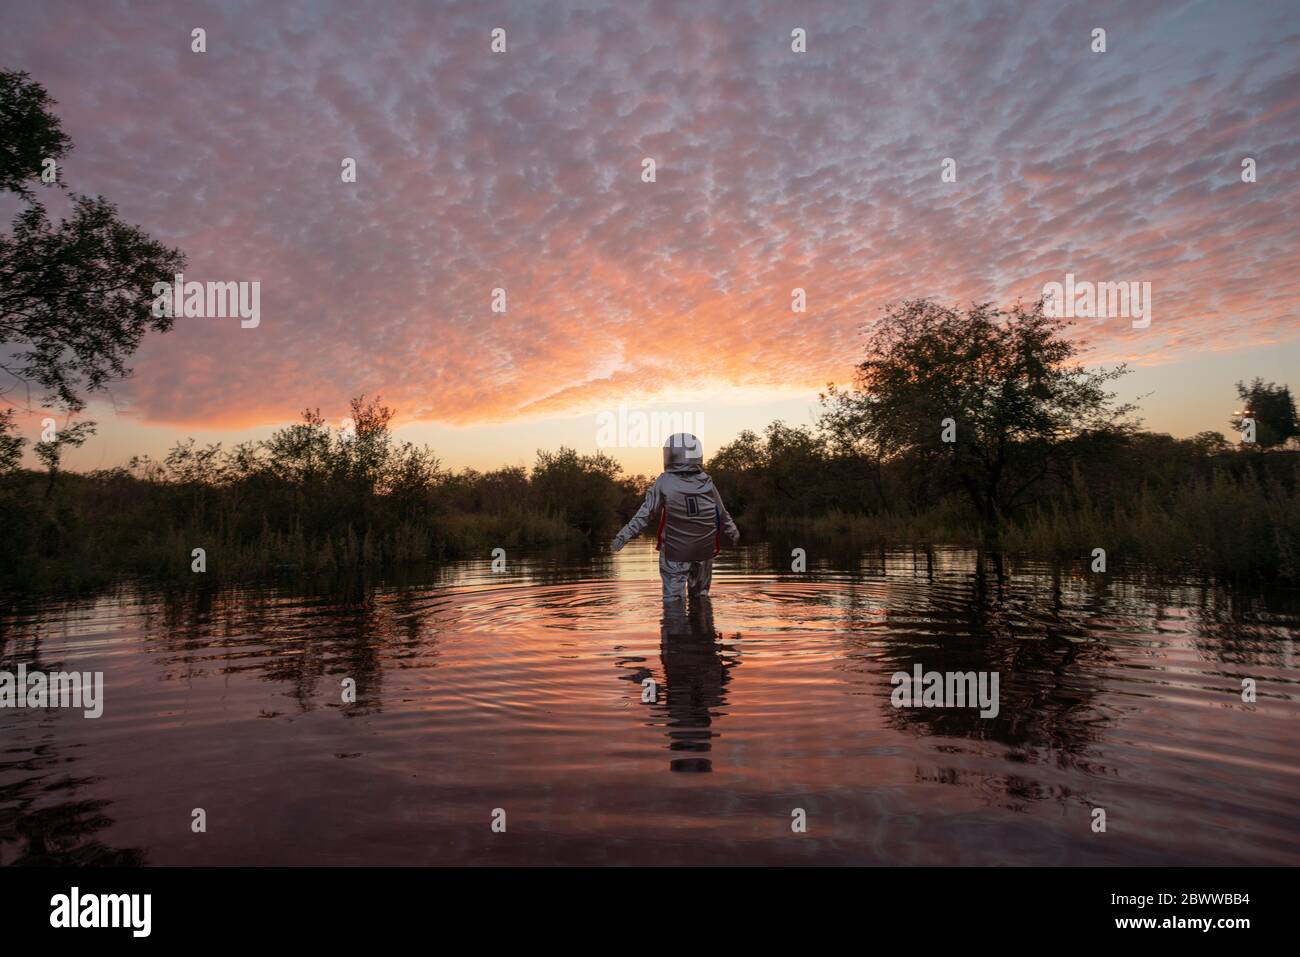 Spacewoman walking in water at sunset Stock Photo